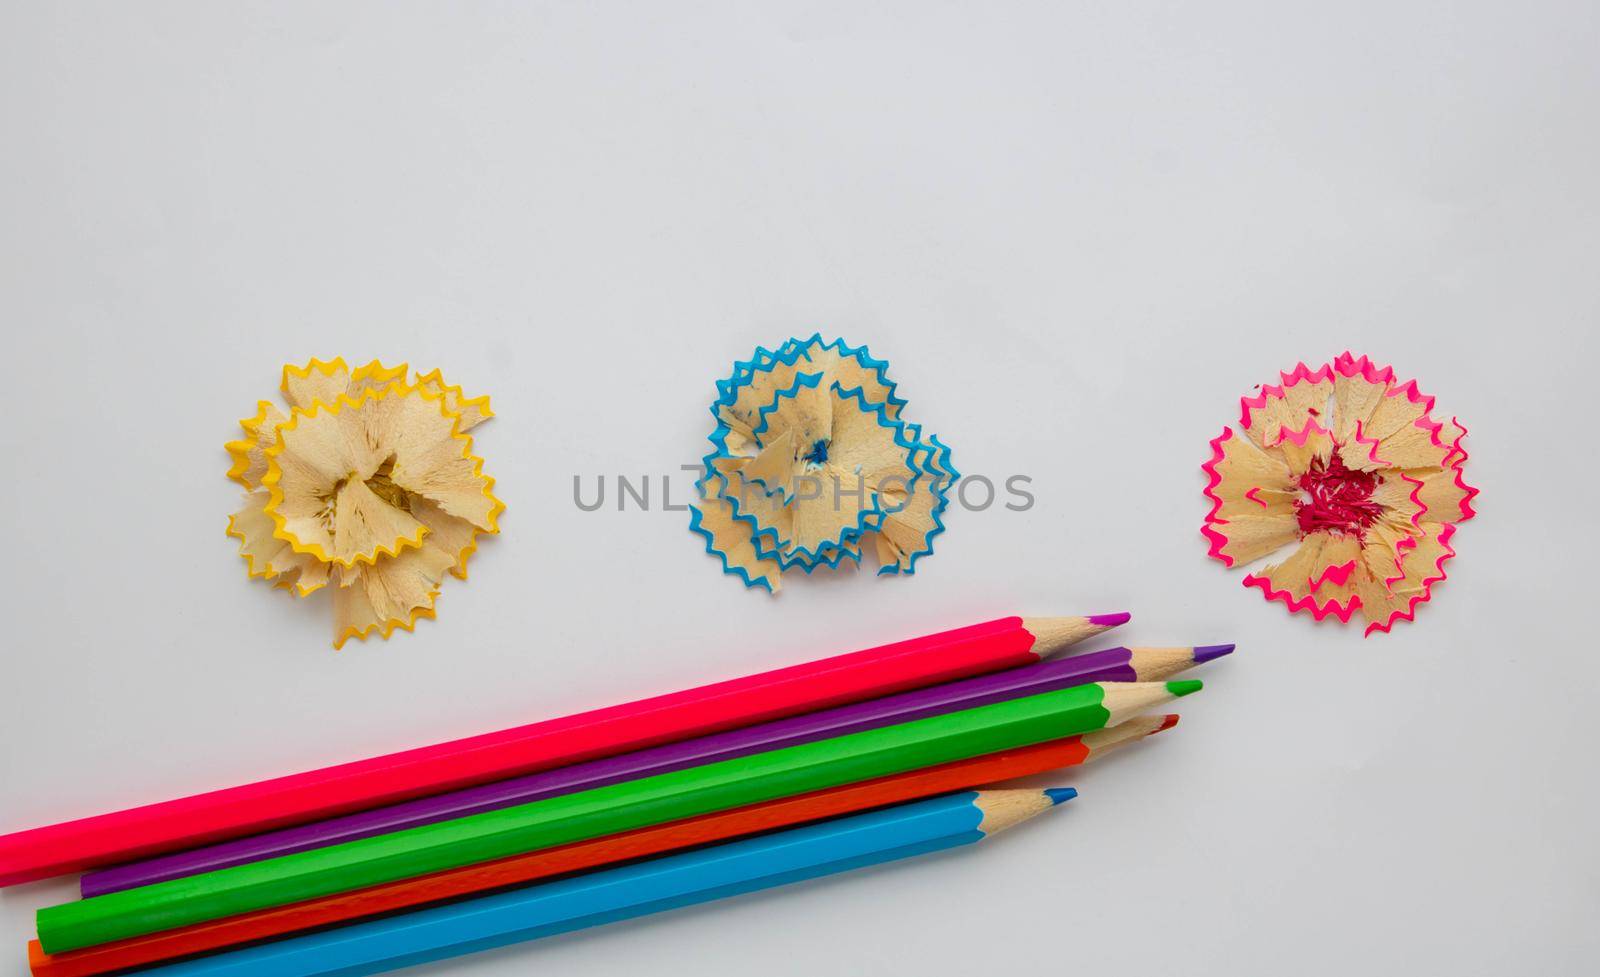 Colored wooden pencils and shavings lined with flowers, isolated on a white background. Old wooden pencils with garbage, shavings. by lapushka62